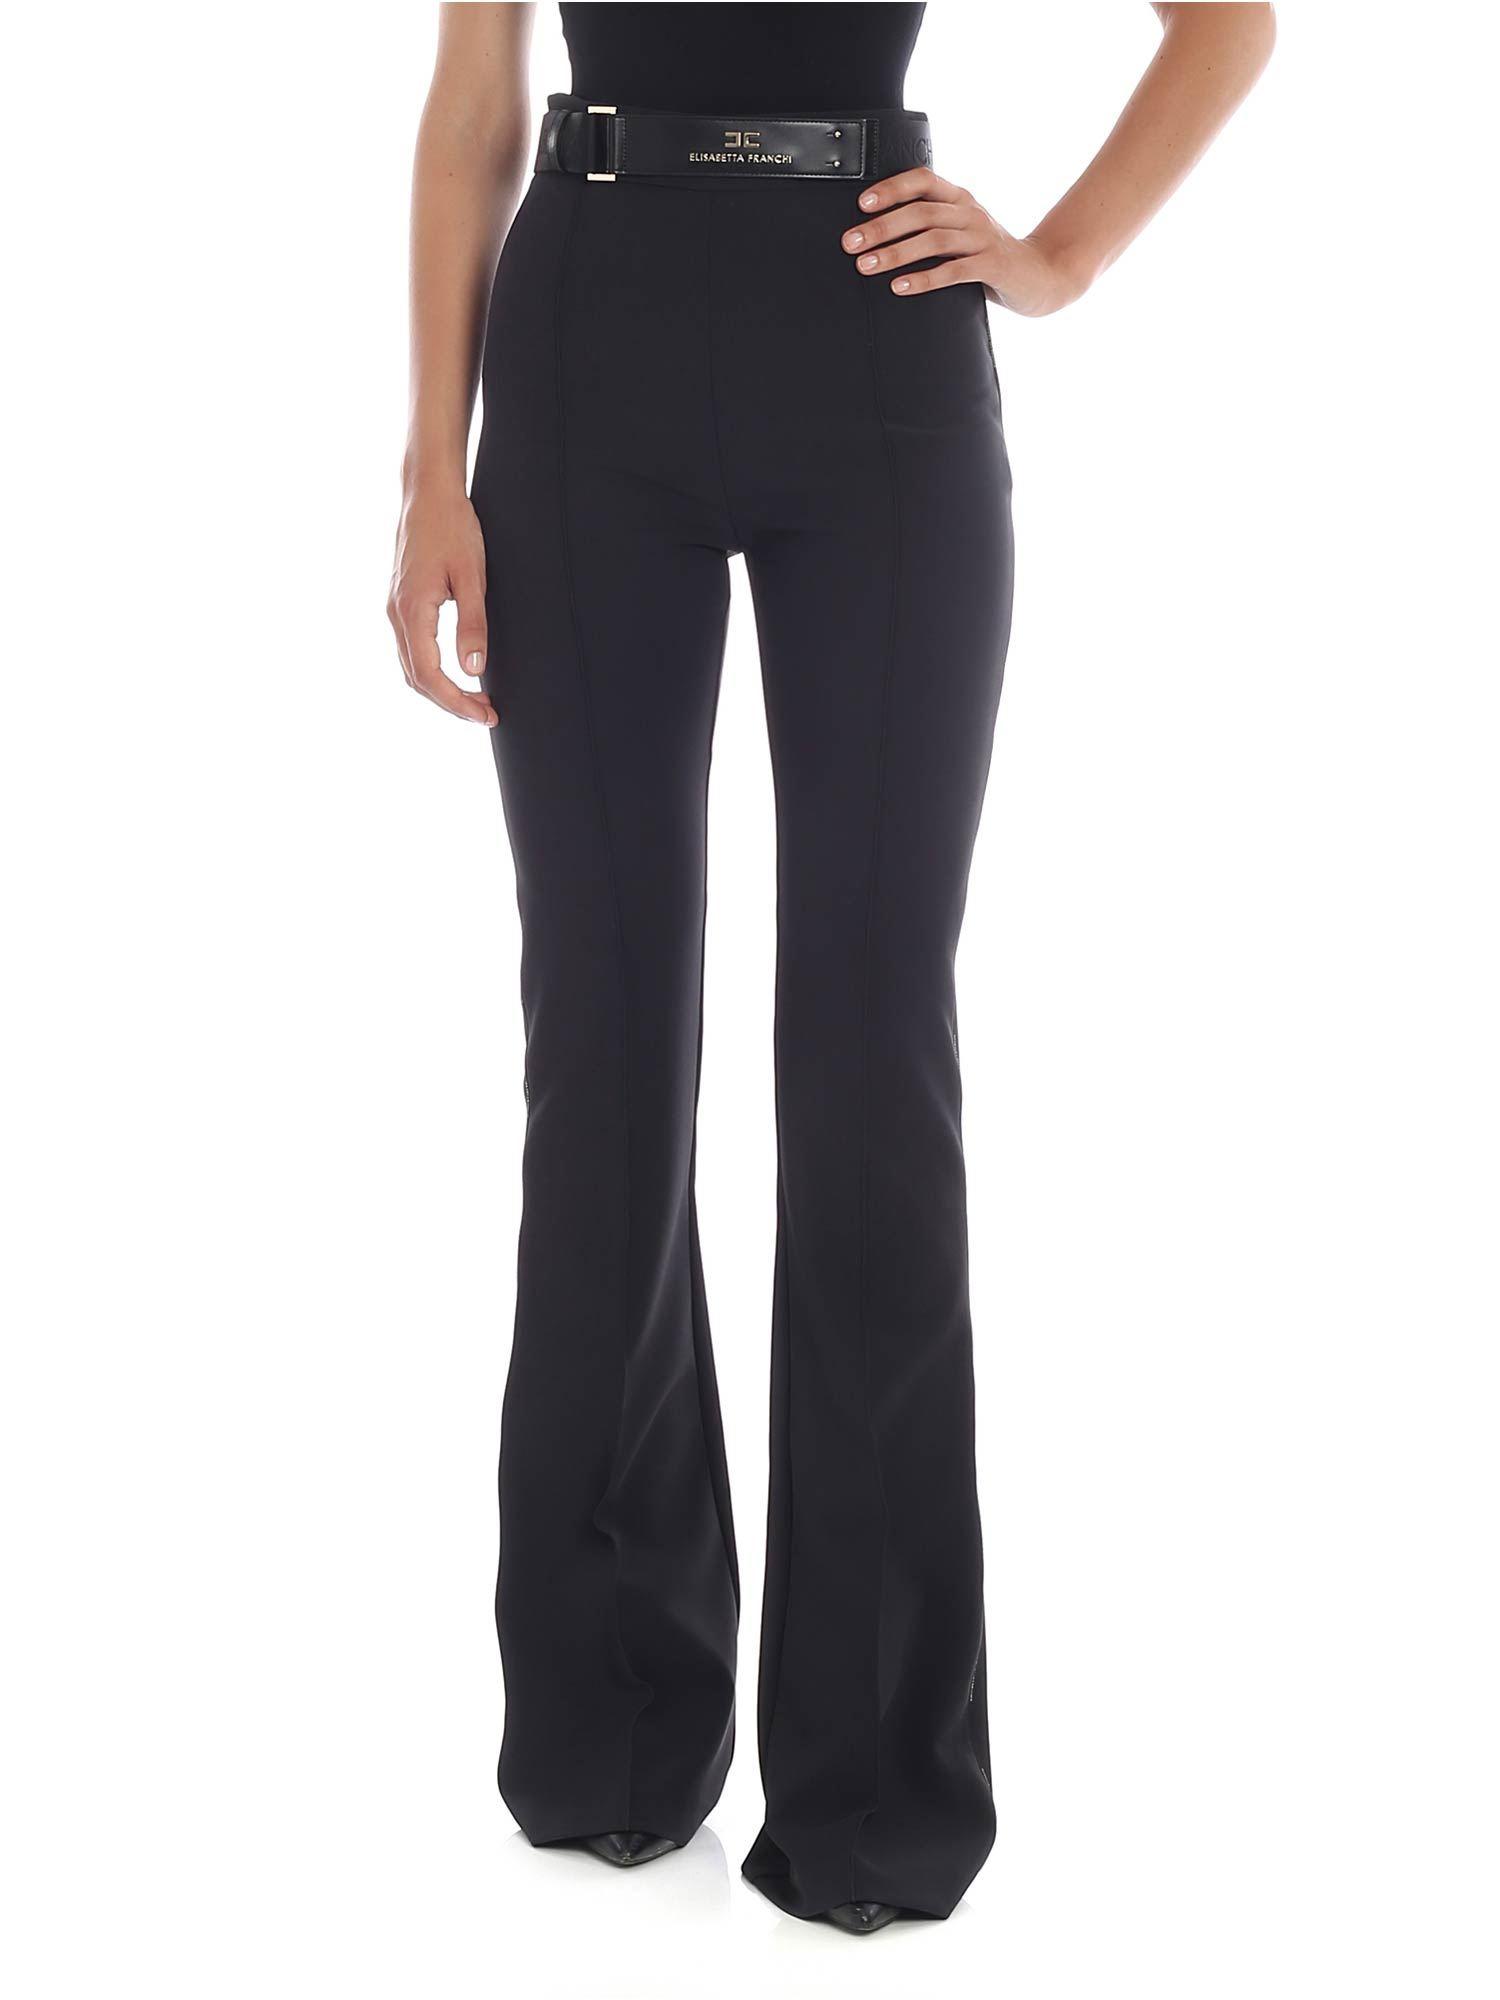 Elisabetta Franchi Synthetic Flared Trousers in Black - Lyst